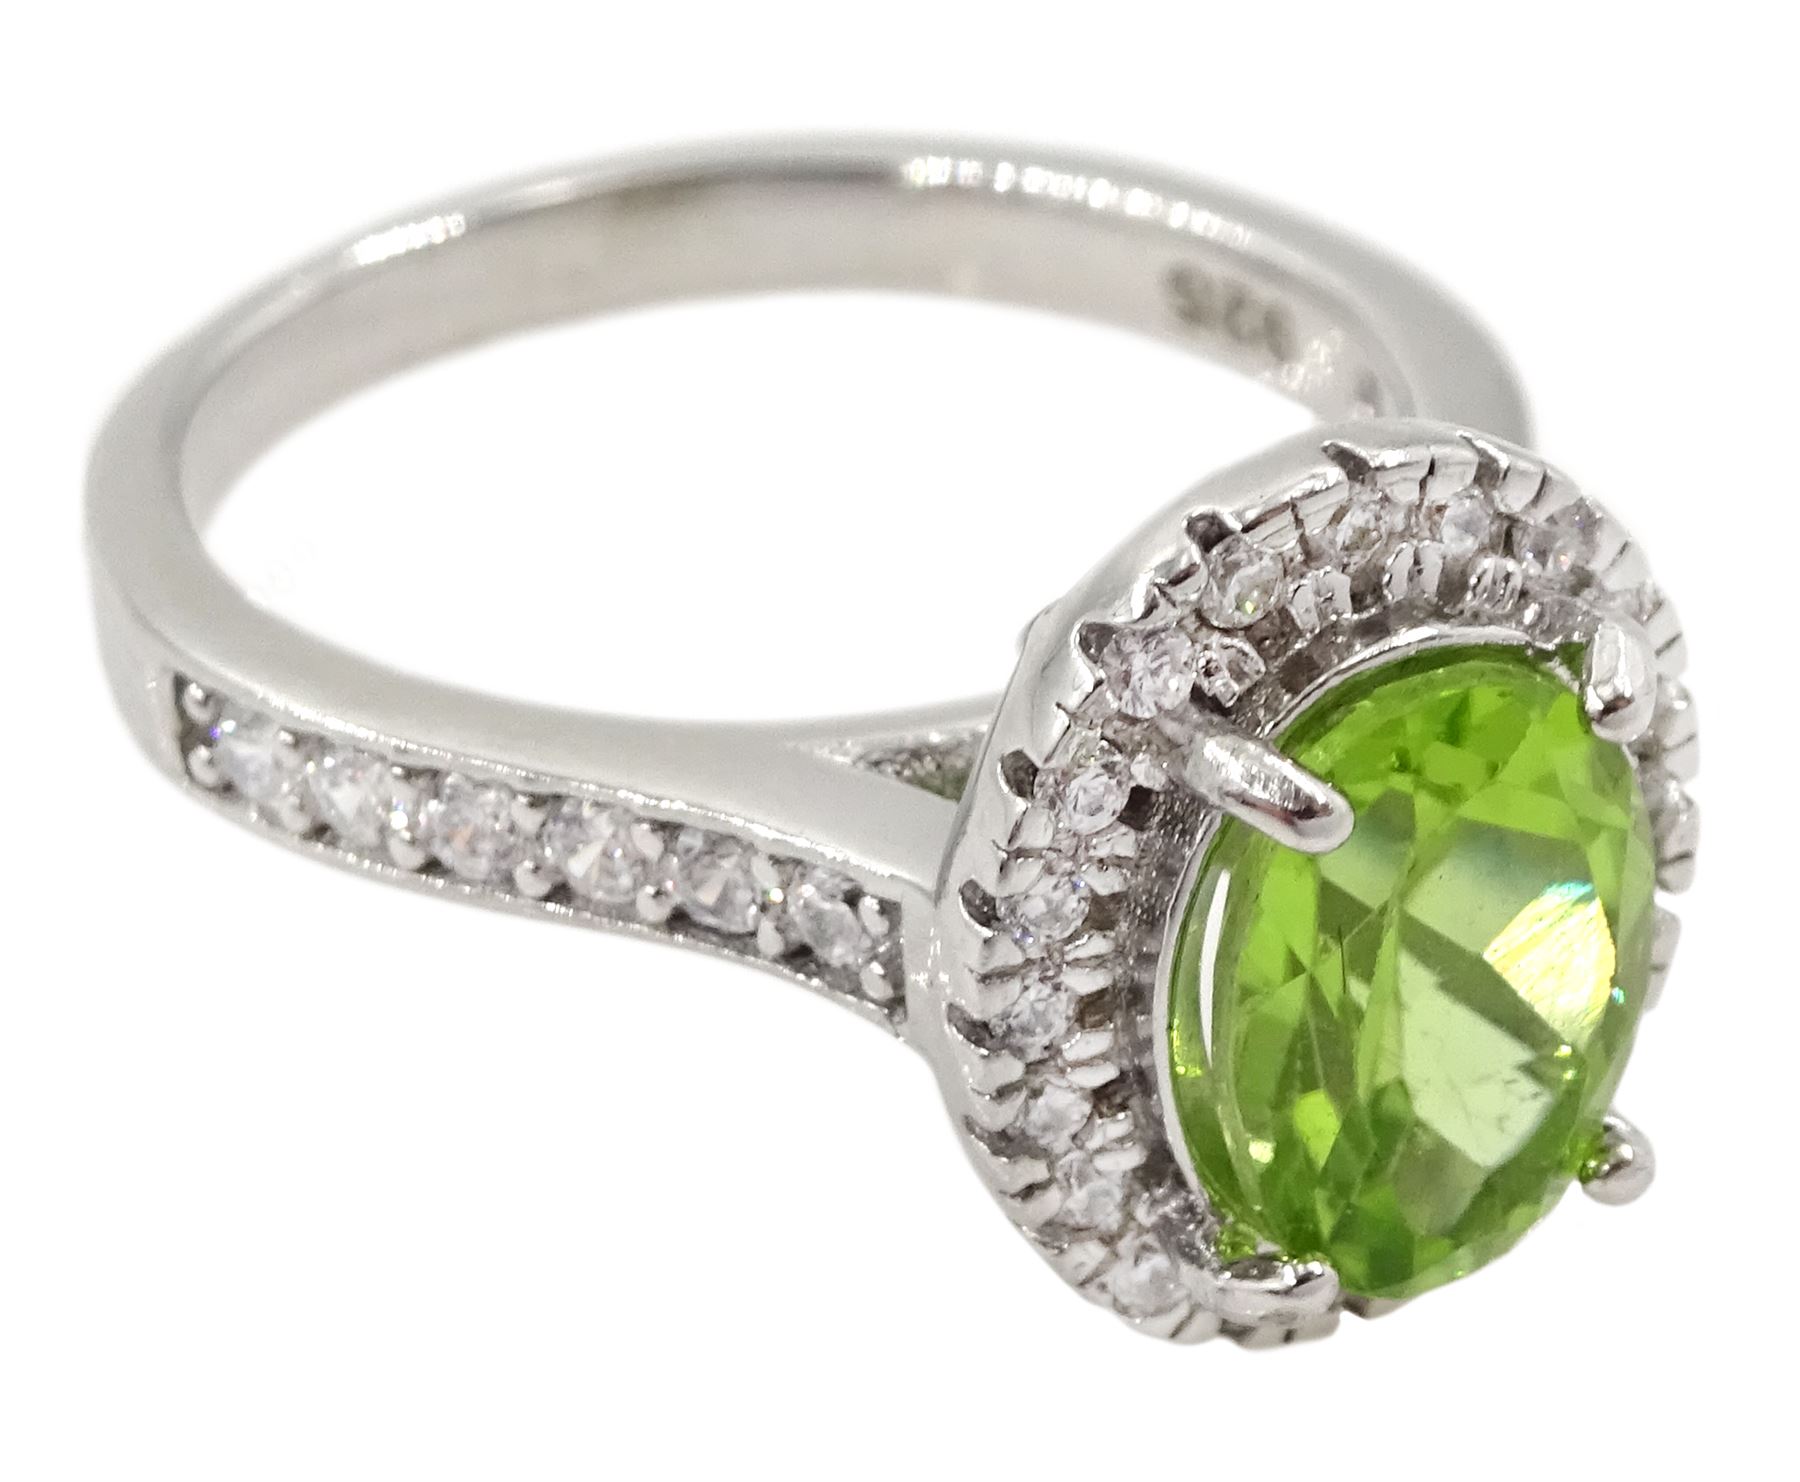 Silver oval peridot and cubic zirconia ring - Image 3 of 4